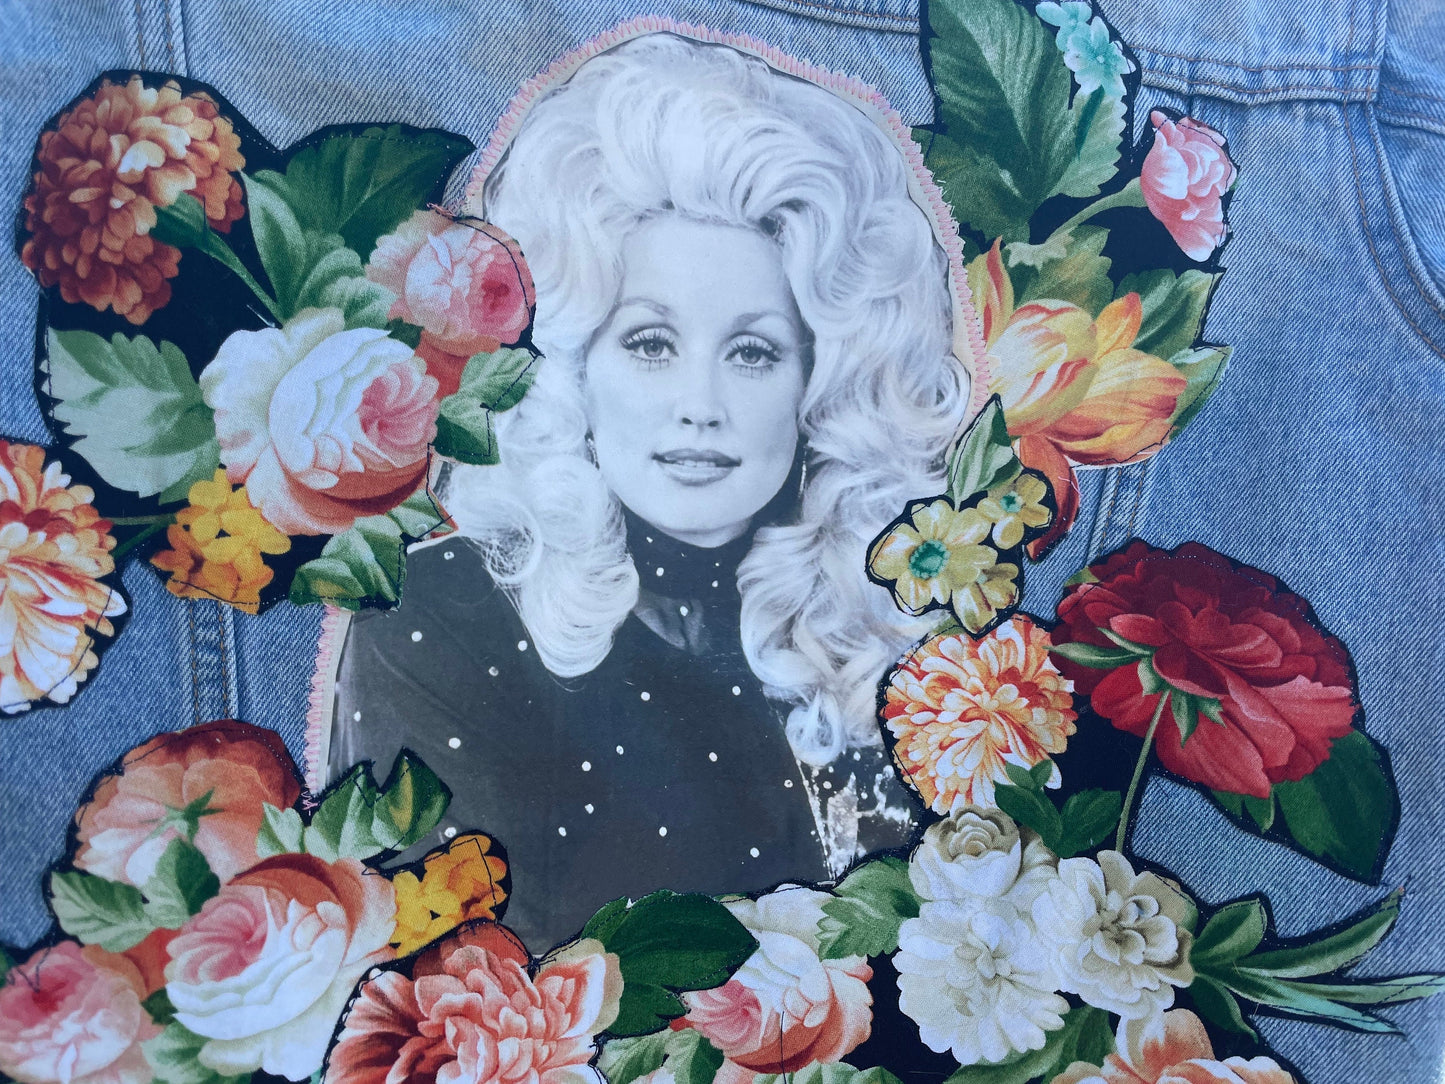 Dolly Parton Jean Jacket. Floral Appliqué. Size Small. One of a kind. Wearable Textile Art